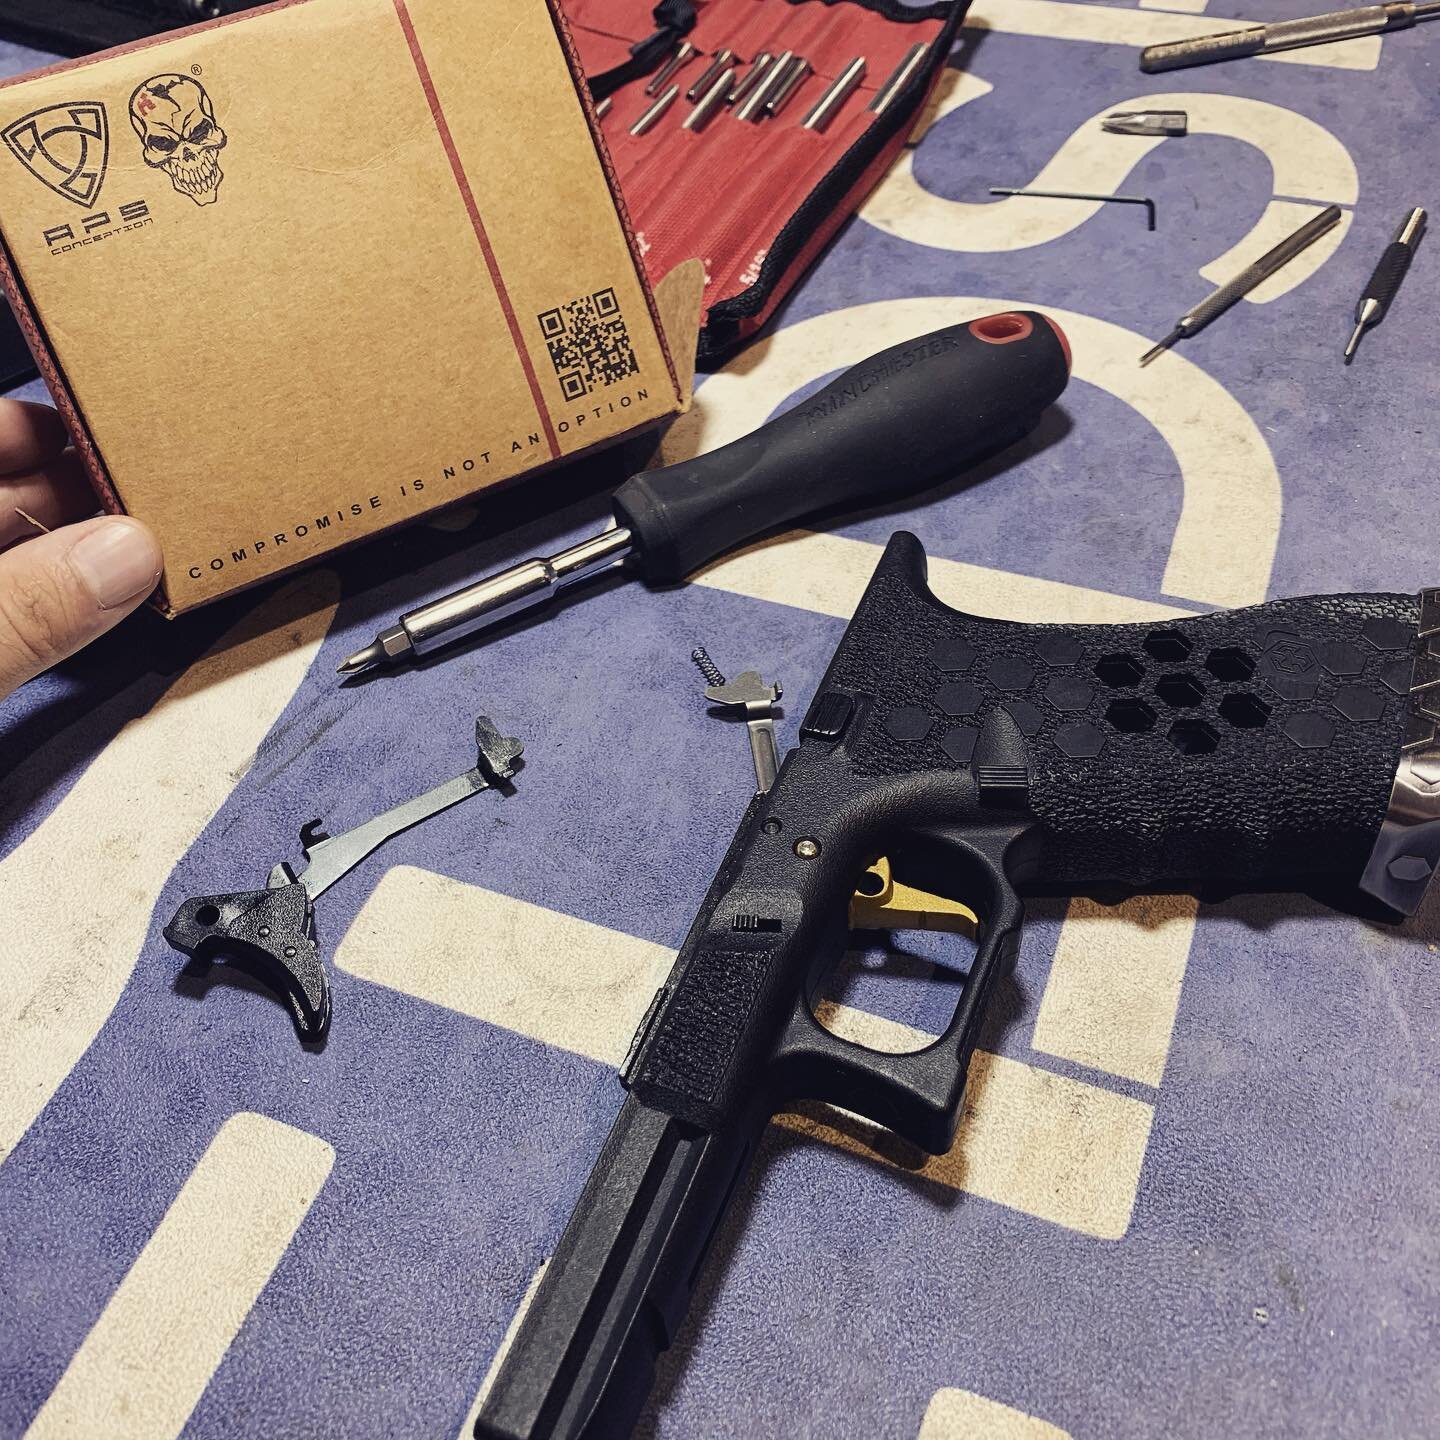 You can&rsquo;t go fast with a bad trigger! Time for an upgrade 😁

#handgun #pistol #glock #actionair #ipsc #airsoft #airsoftgun #airsoftnation #shooting #gun #guns #upgrade #trigger #gold #ilovegold #gunroom #englishshooting #bluefieldsports #maglo